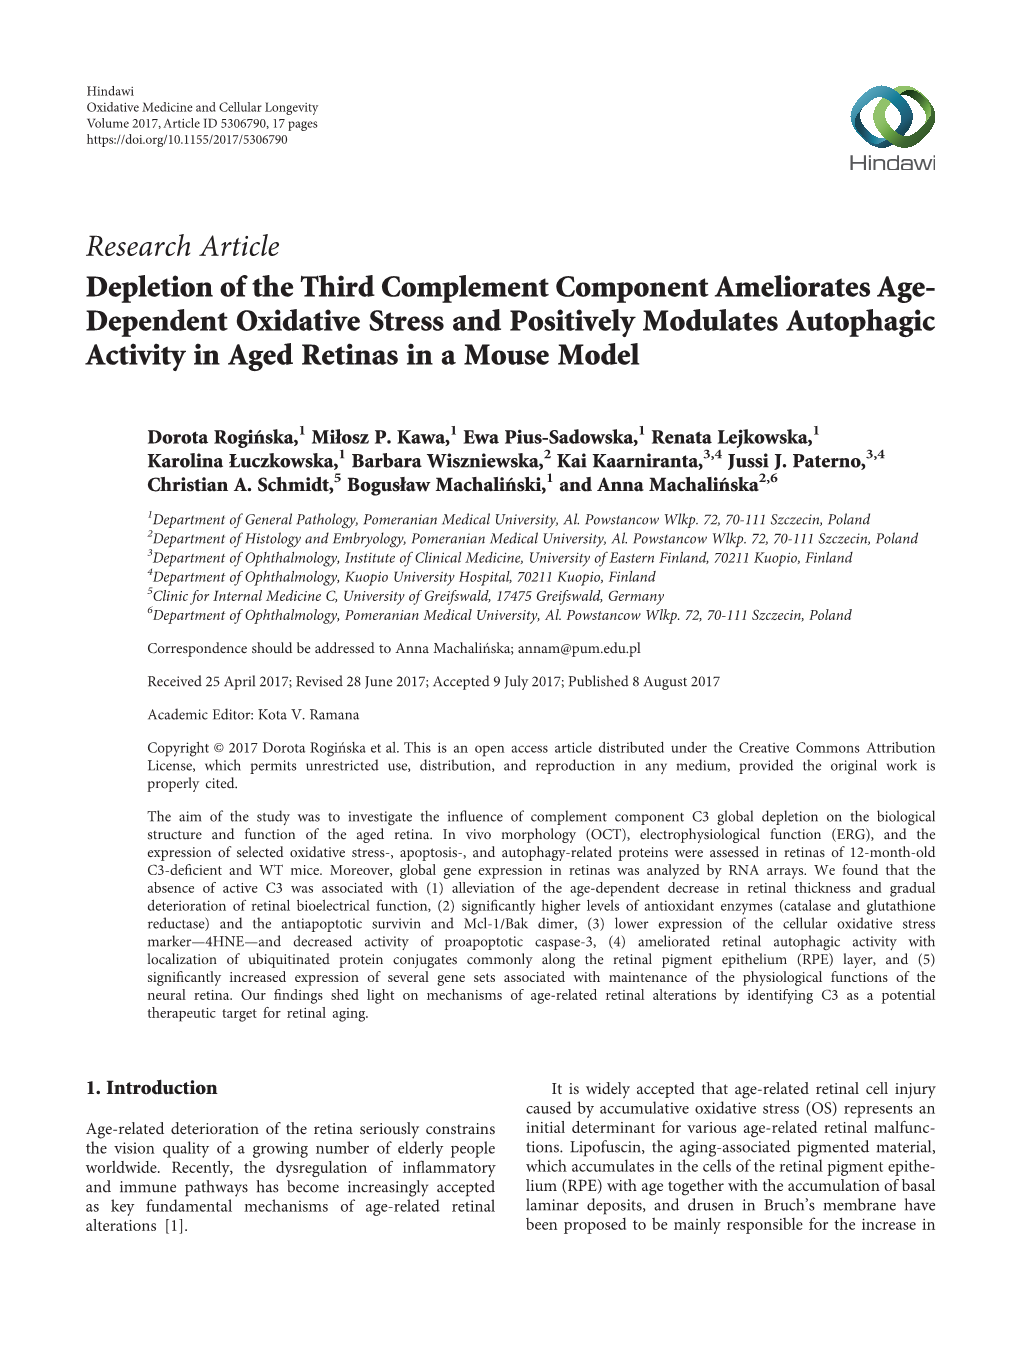 Depletion of the Third Complement Component Ameliorates Age- Dependent Oxidative Stress and Positively Modulates Autophagic Activity in Aged Retinas in a Mouse Model